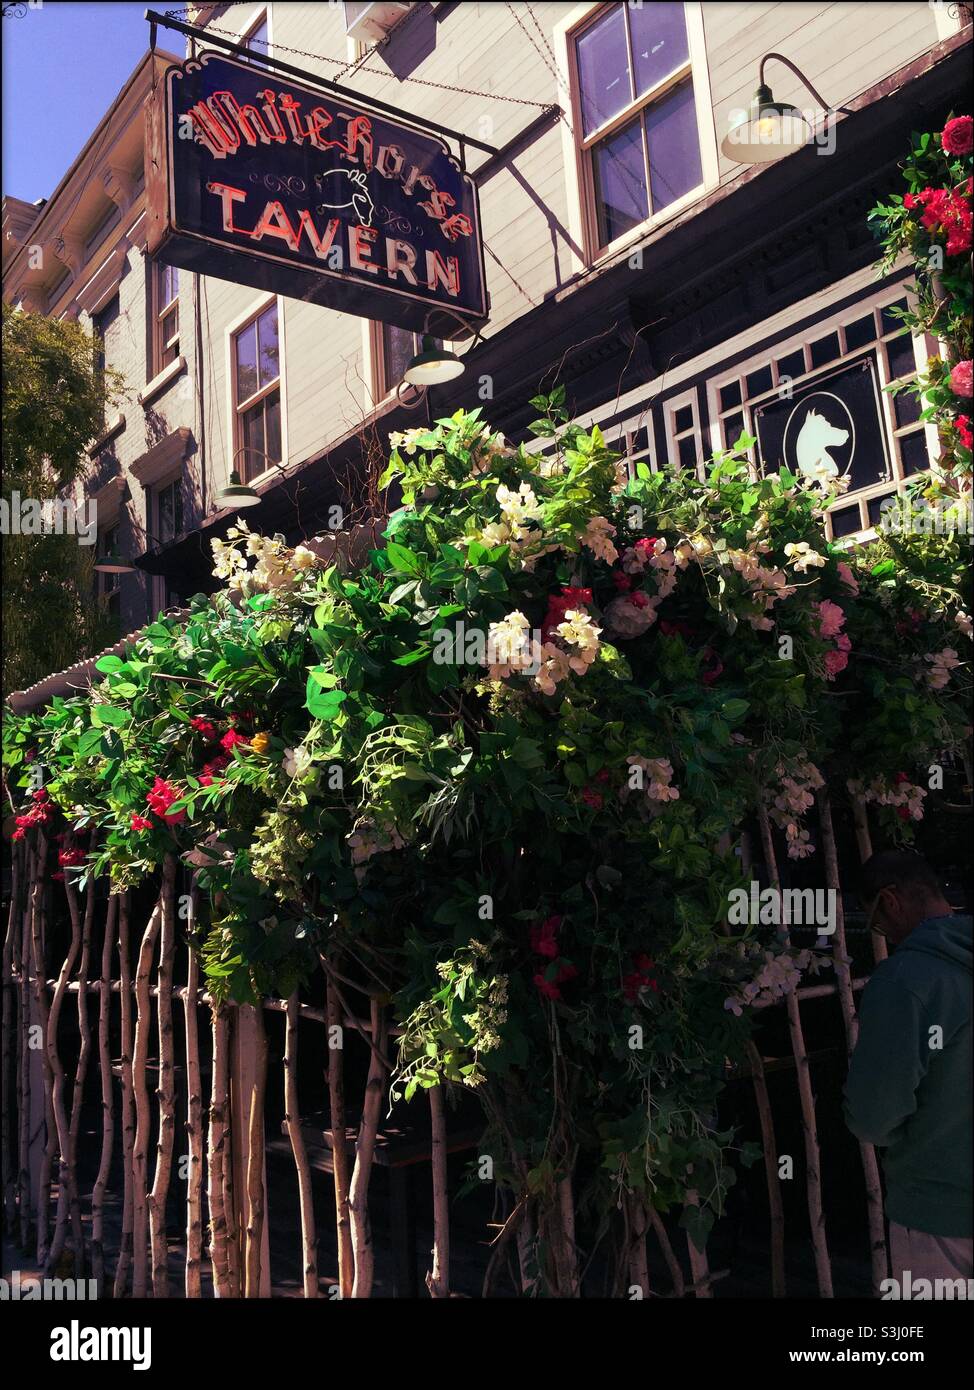 White Horse Tavern with outdoor seating during the Covid pandemic Stock Photo